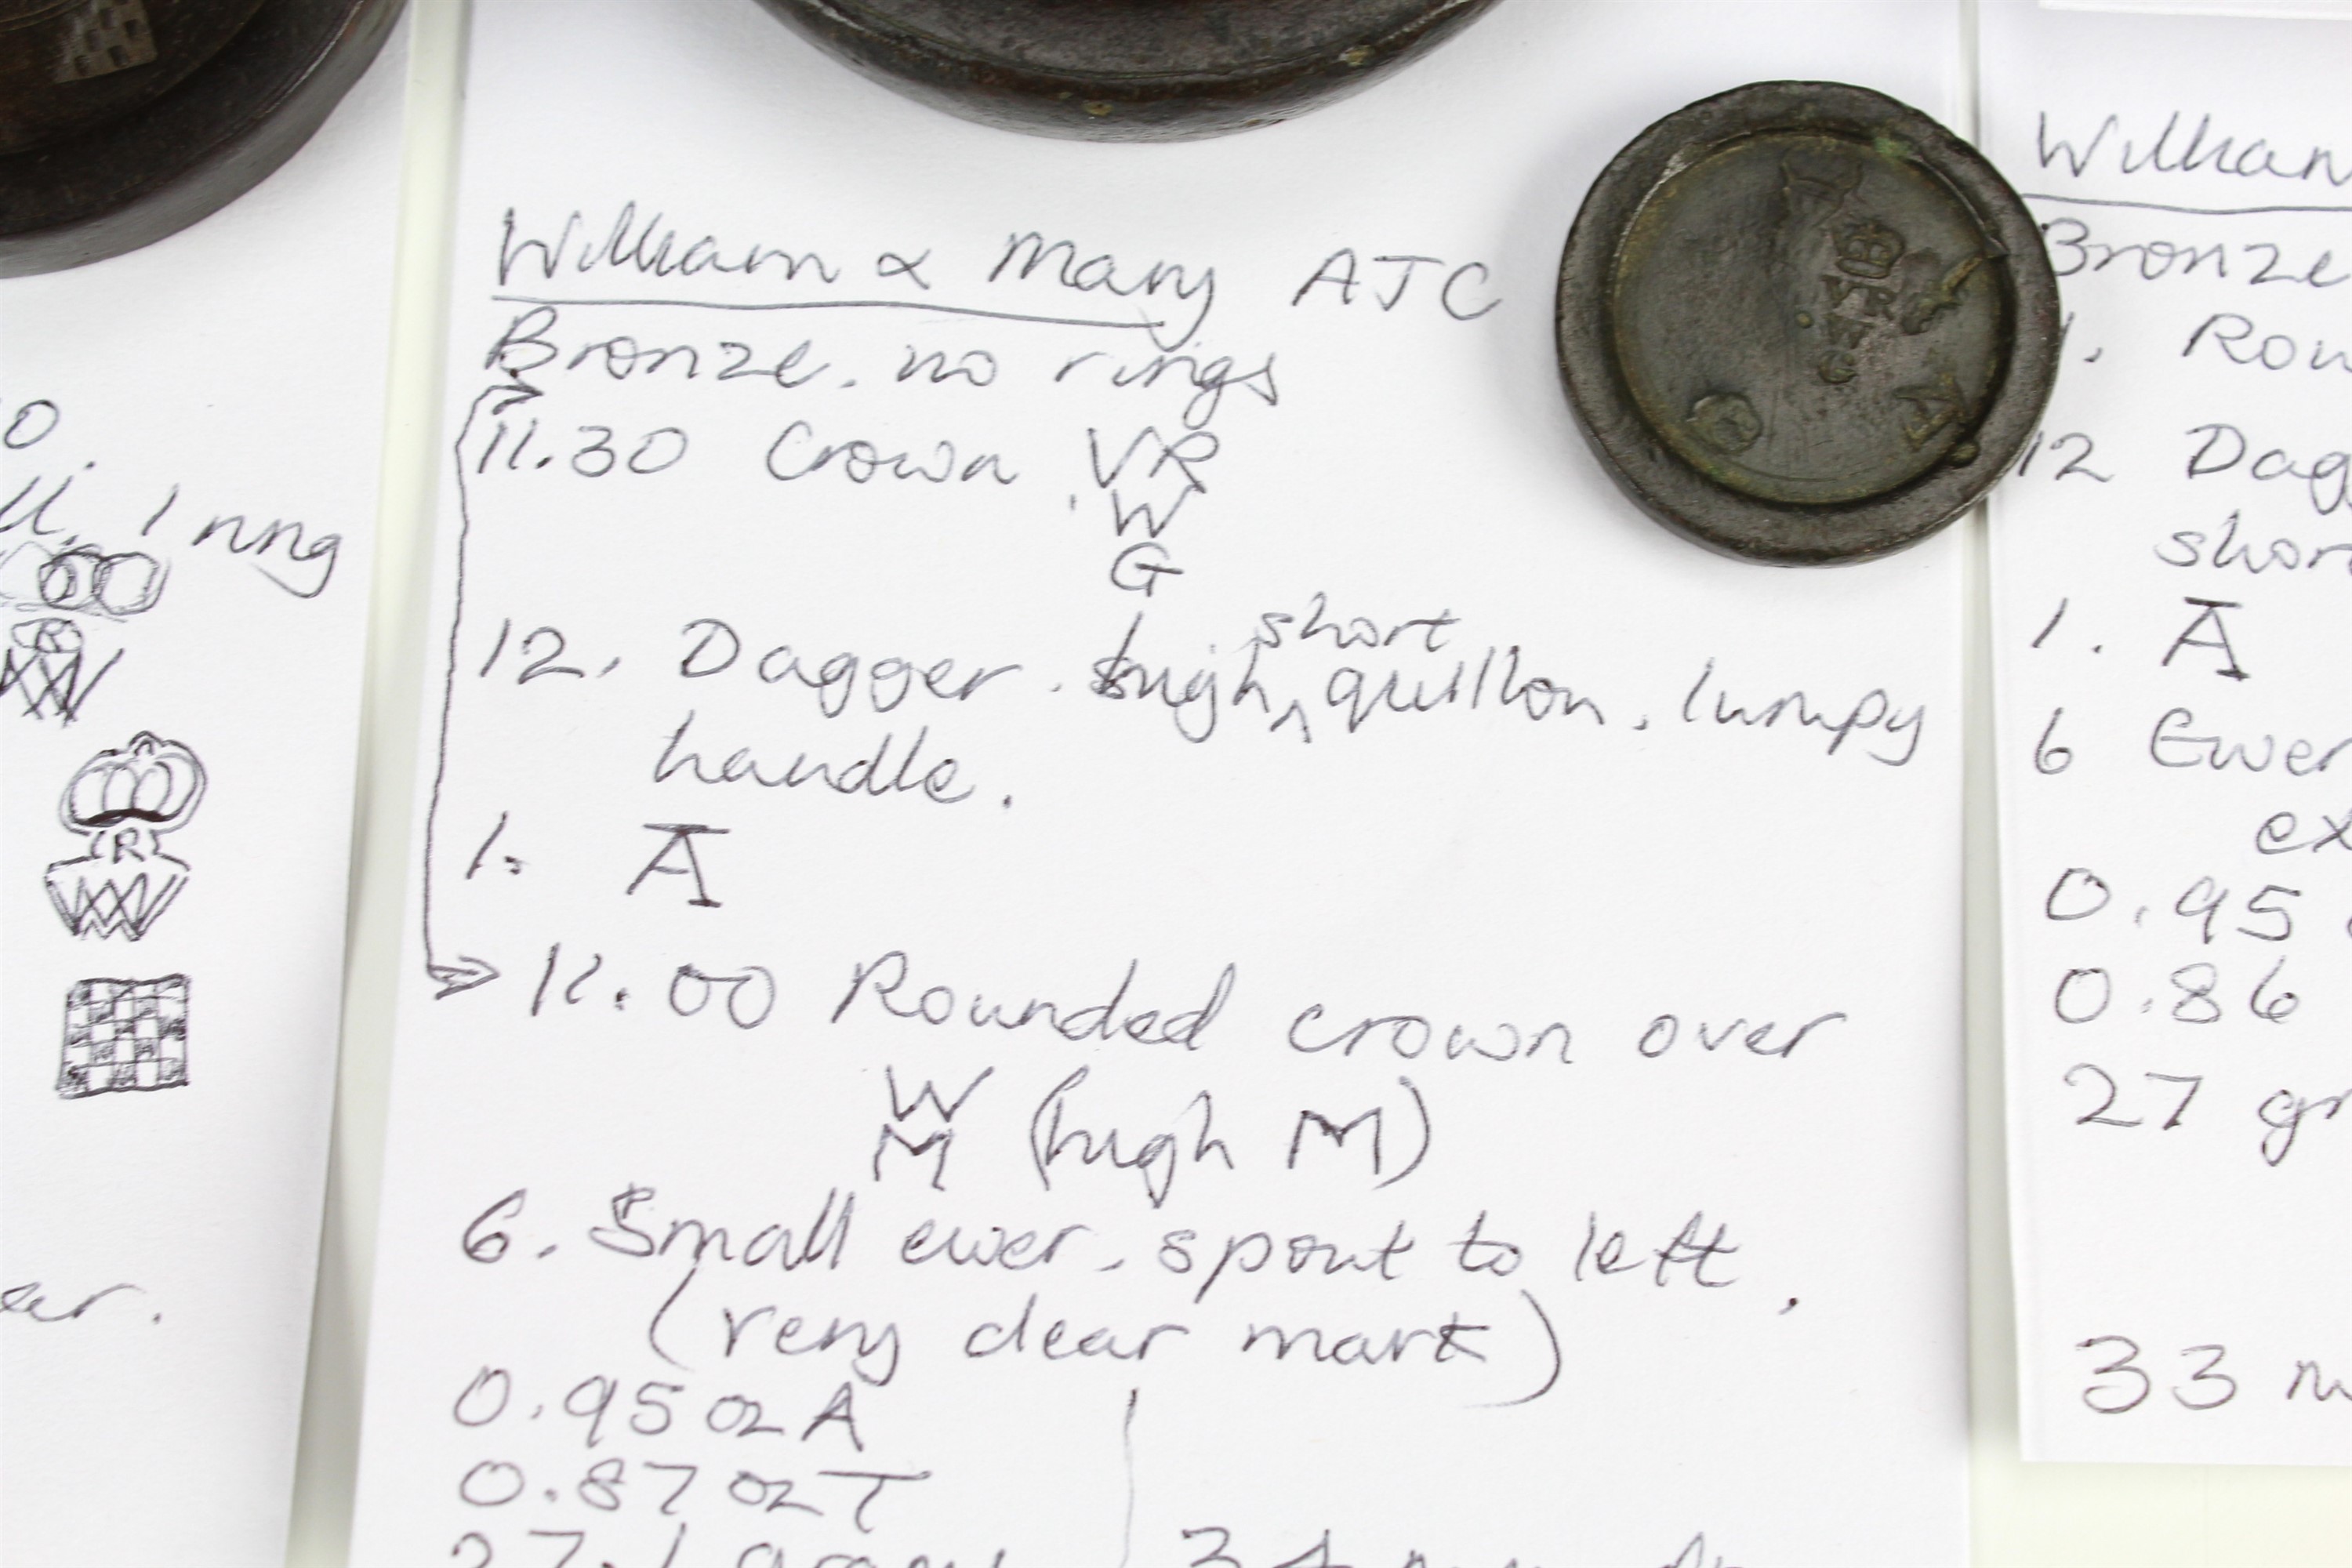 14 William and Mary bronze trade weights, including marks for 'Gloucester Co', and a chequerboard - Image 5 of 7